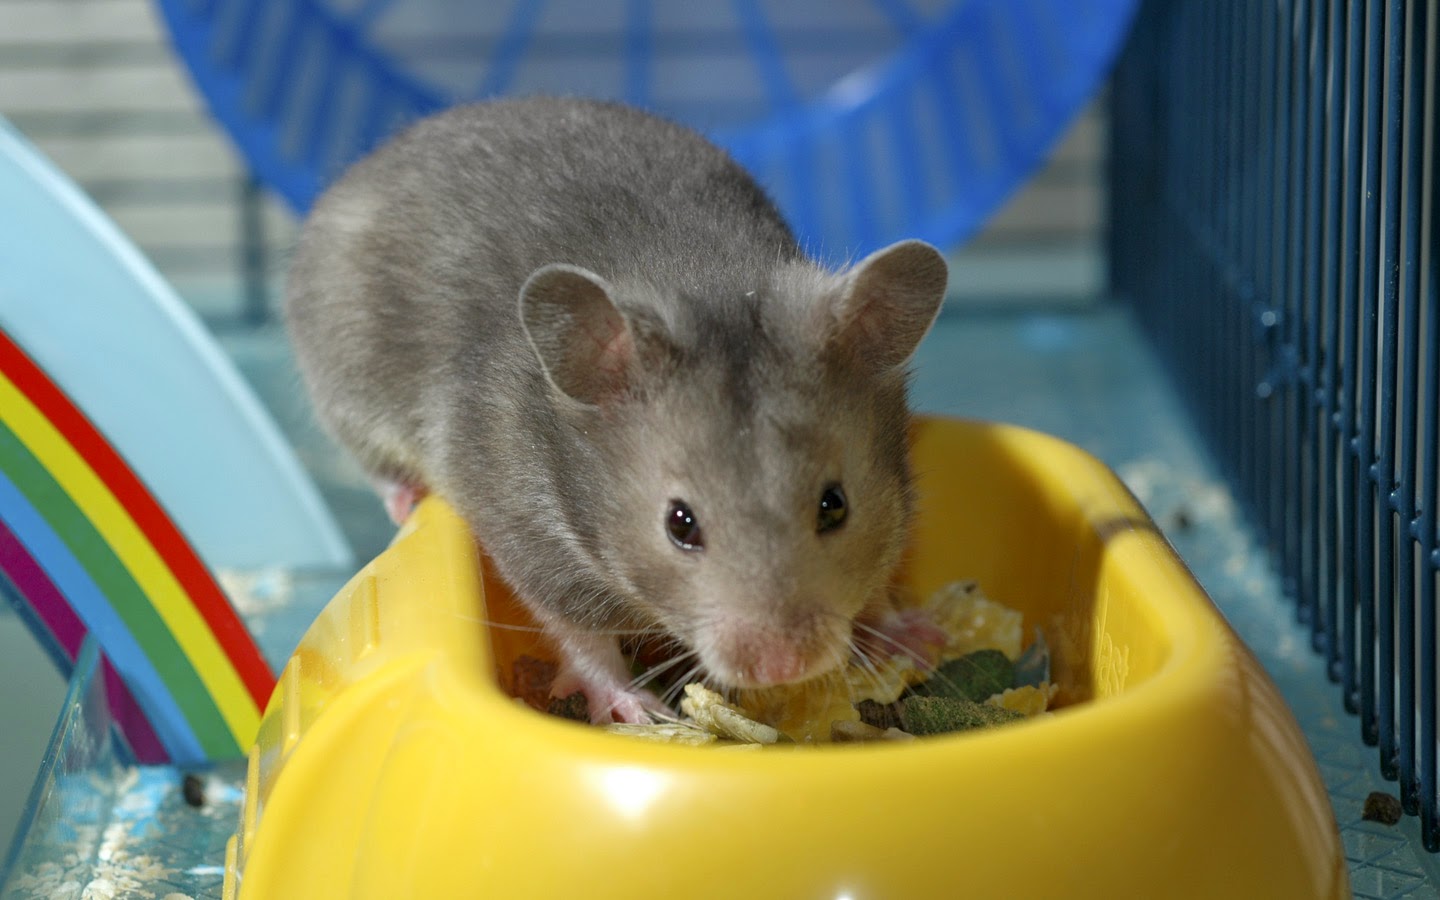 The image shows a gray hamster in a cage with a yellow food dish containing different food items, and there's a multi-story habitat with a colorful bridge or ramp in the background, indicating a comfortable pet environment.